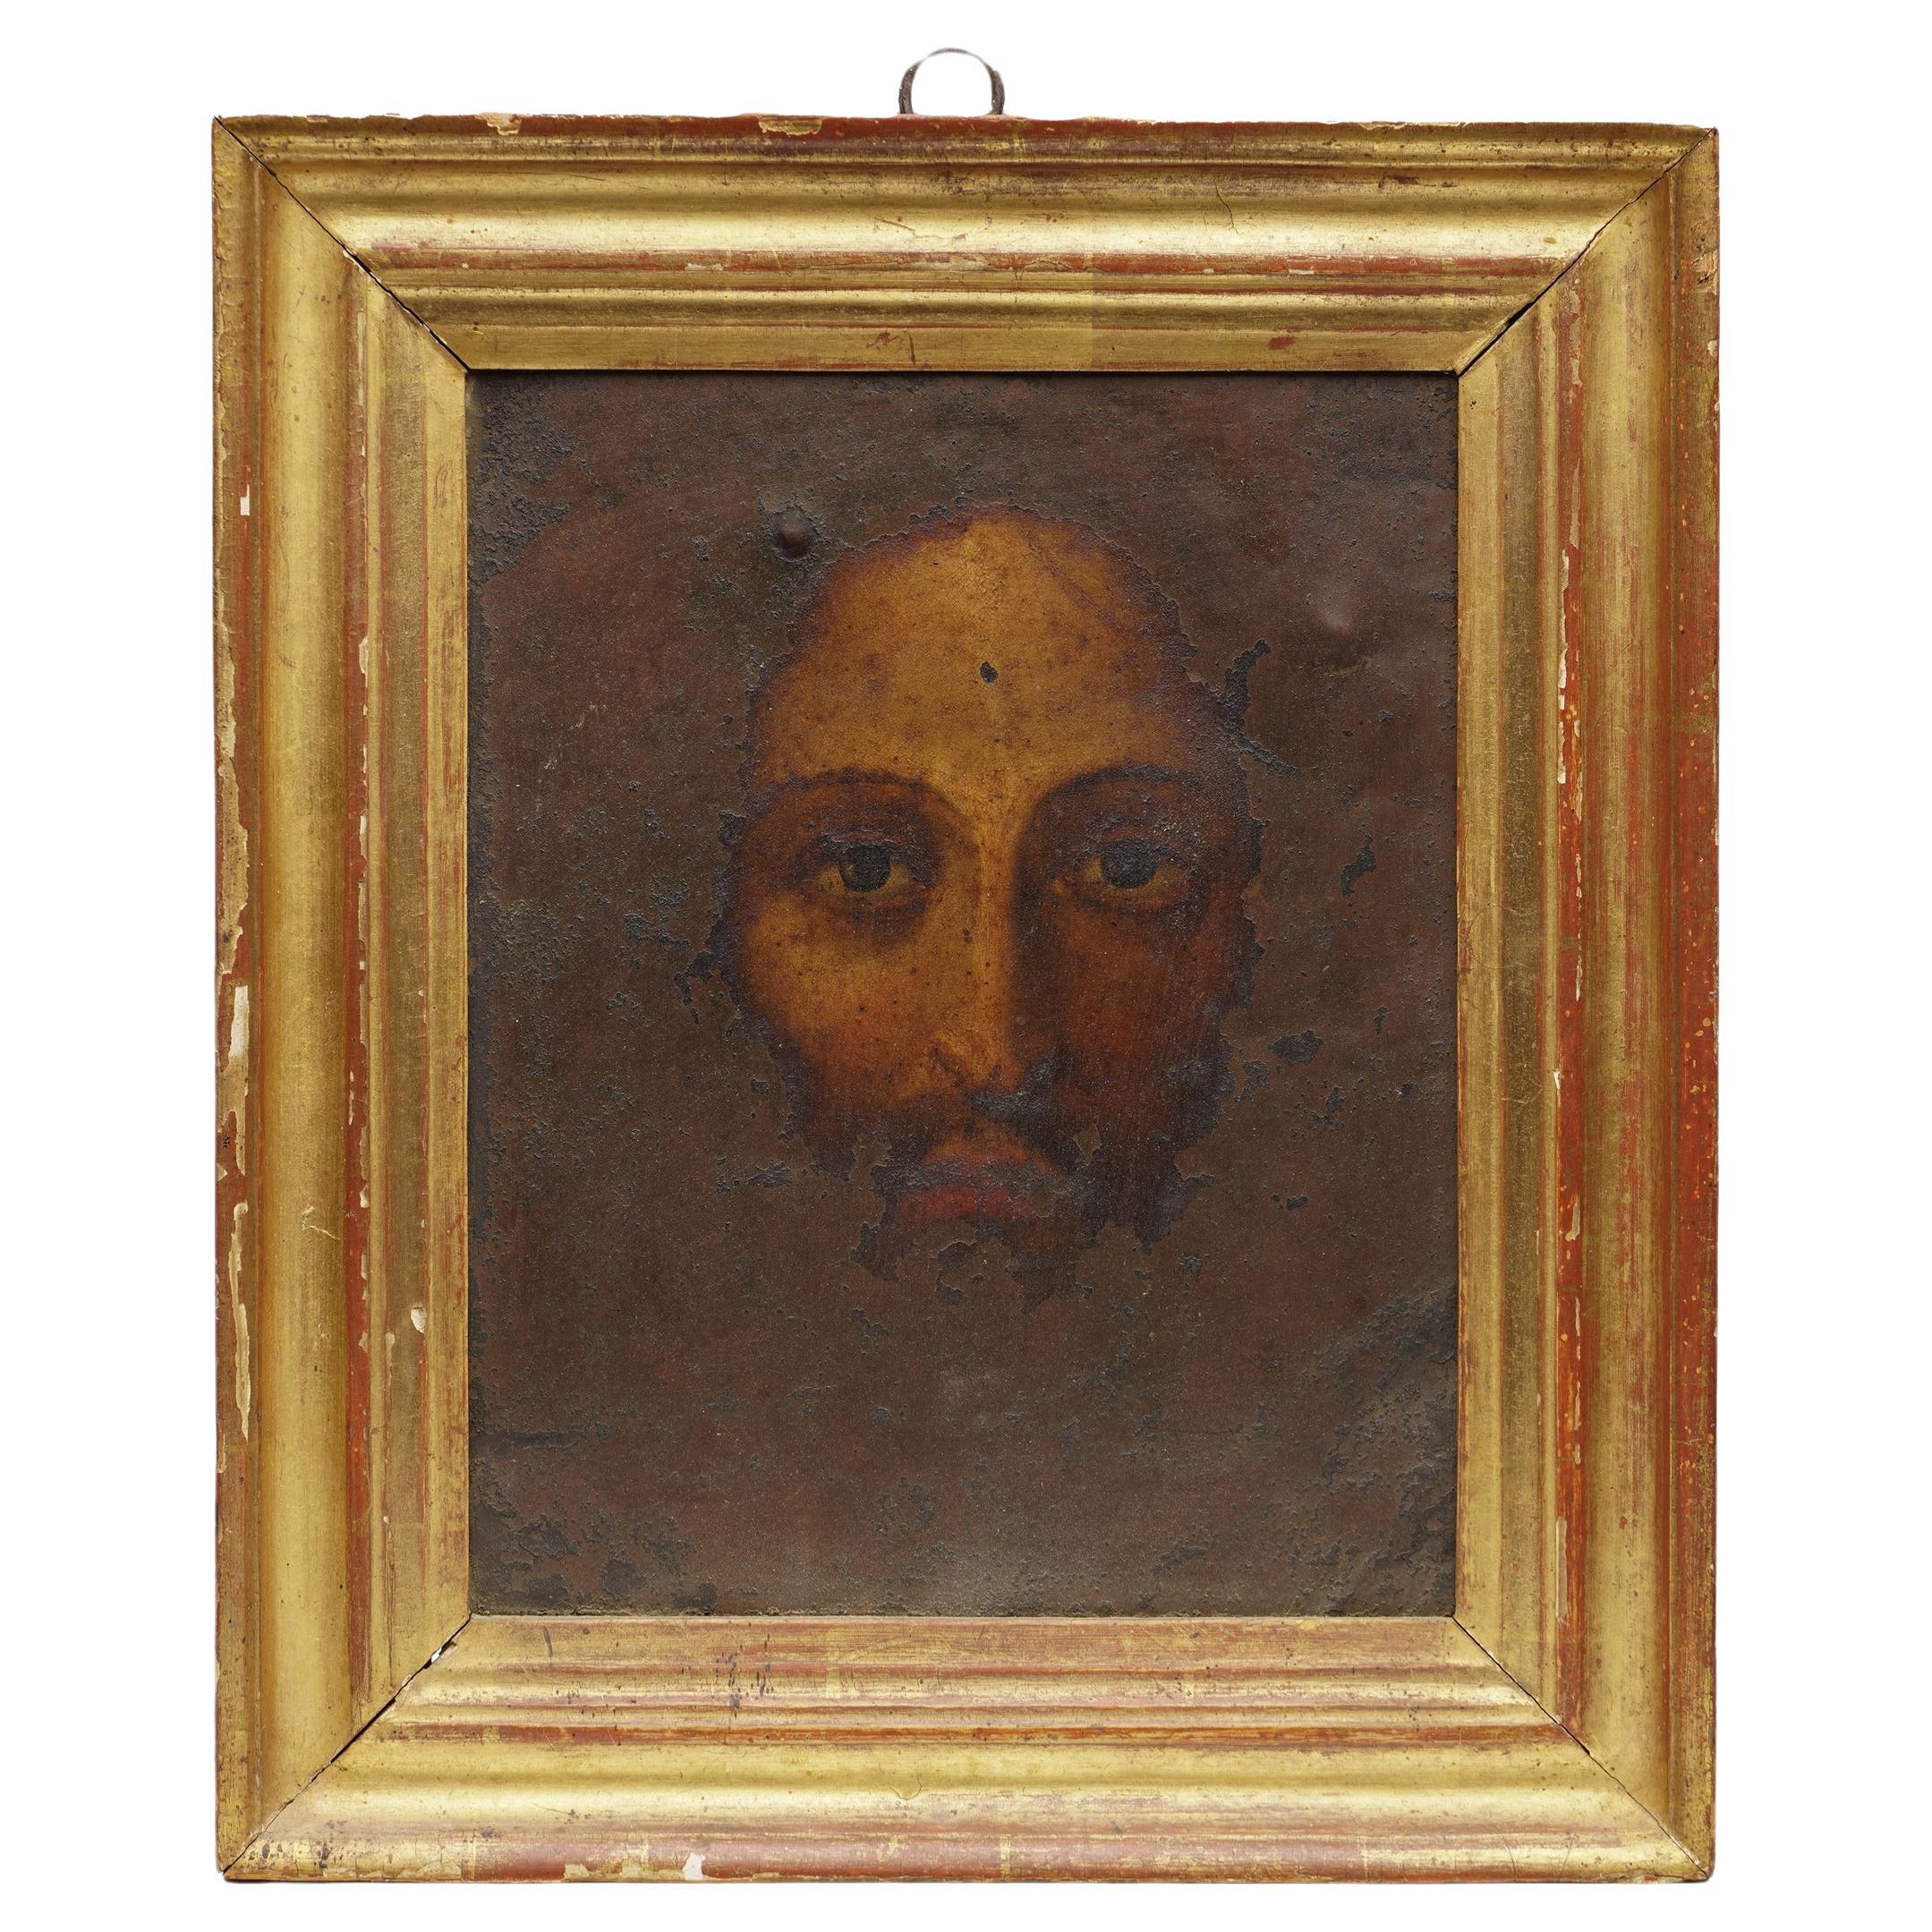 Early 19th Century Oil Painting of Jesus on Copper Panel.